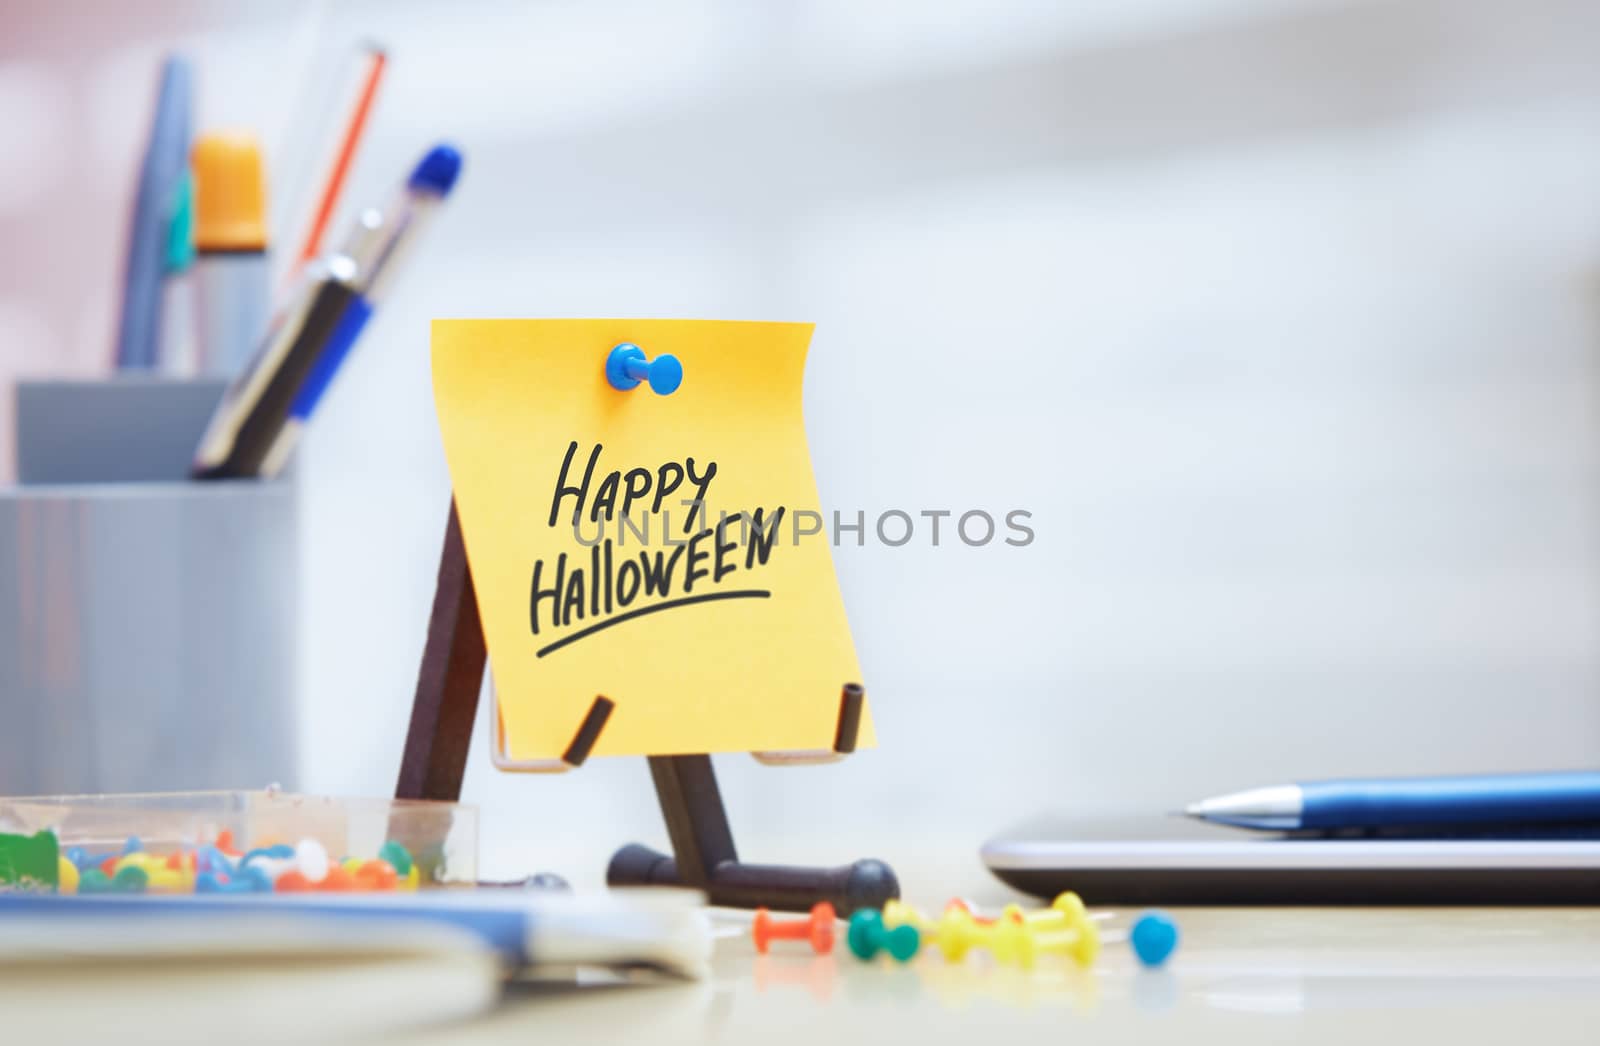 Hand taking sticky note with Happy Halloween text